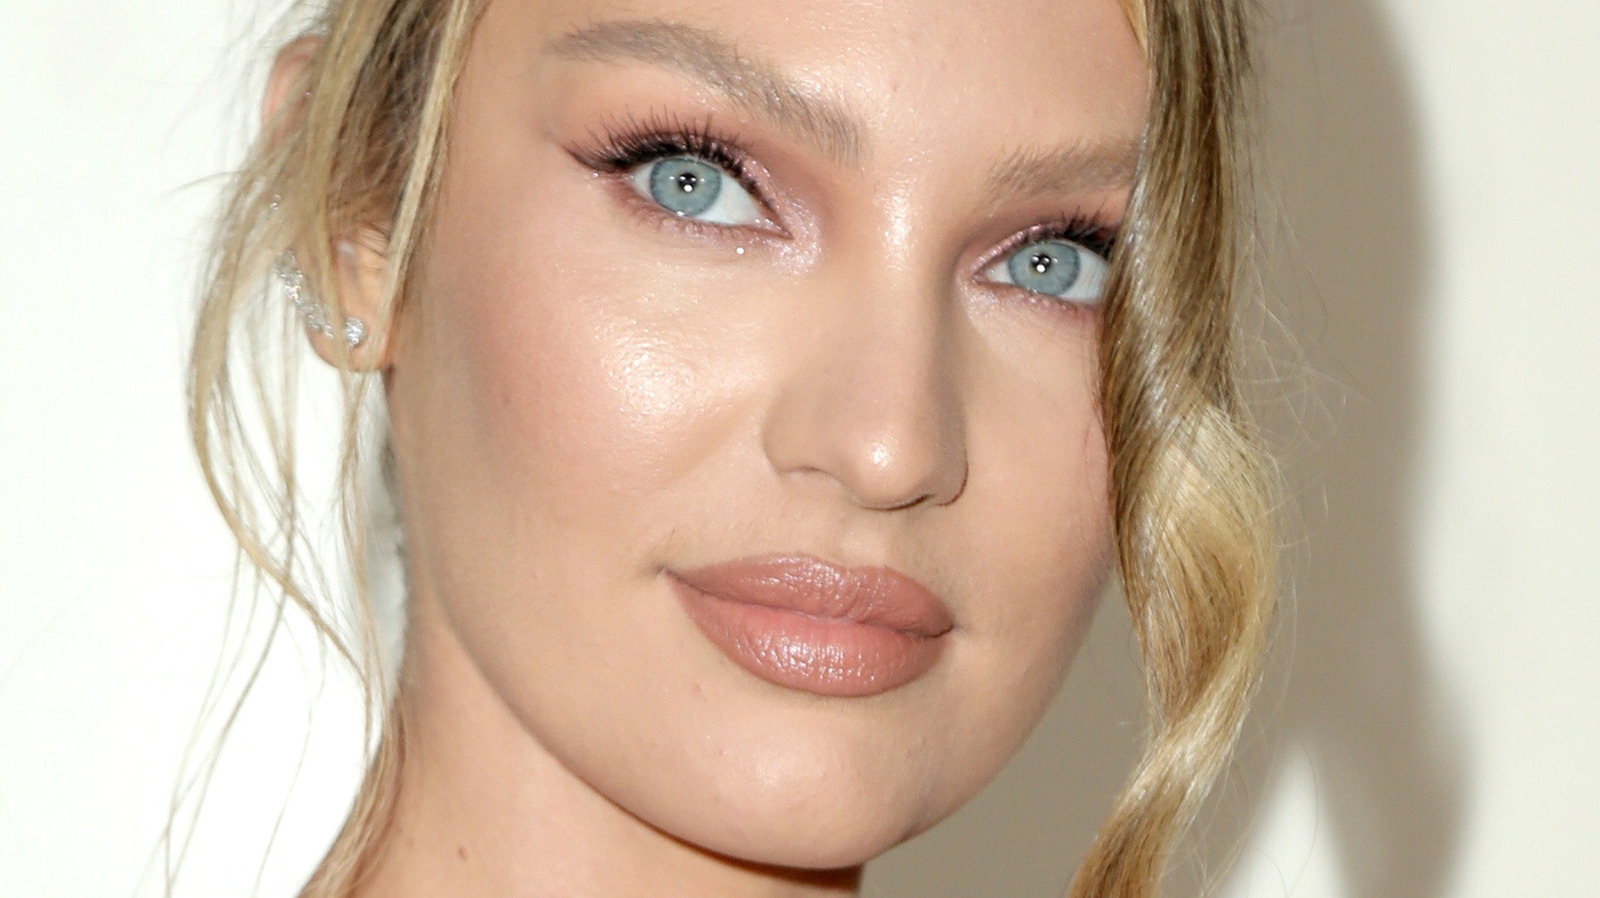 Candice Swanepoel Has the Perfect Response to Fans Who Think She